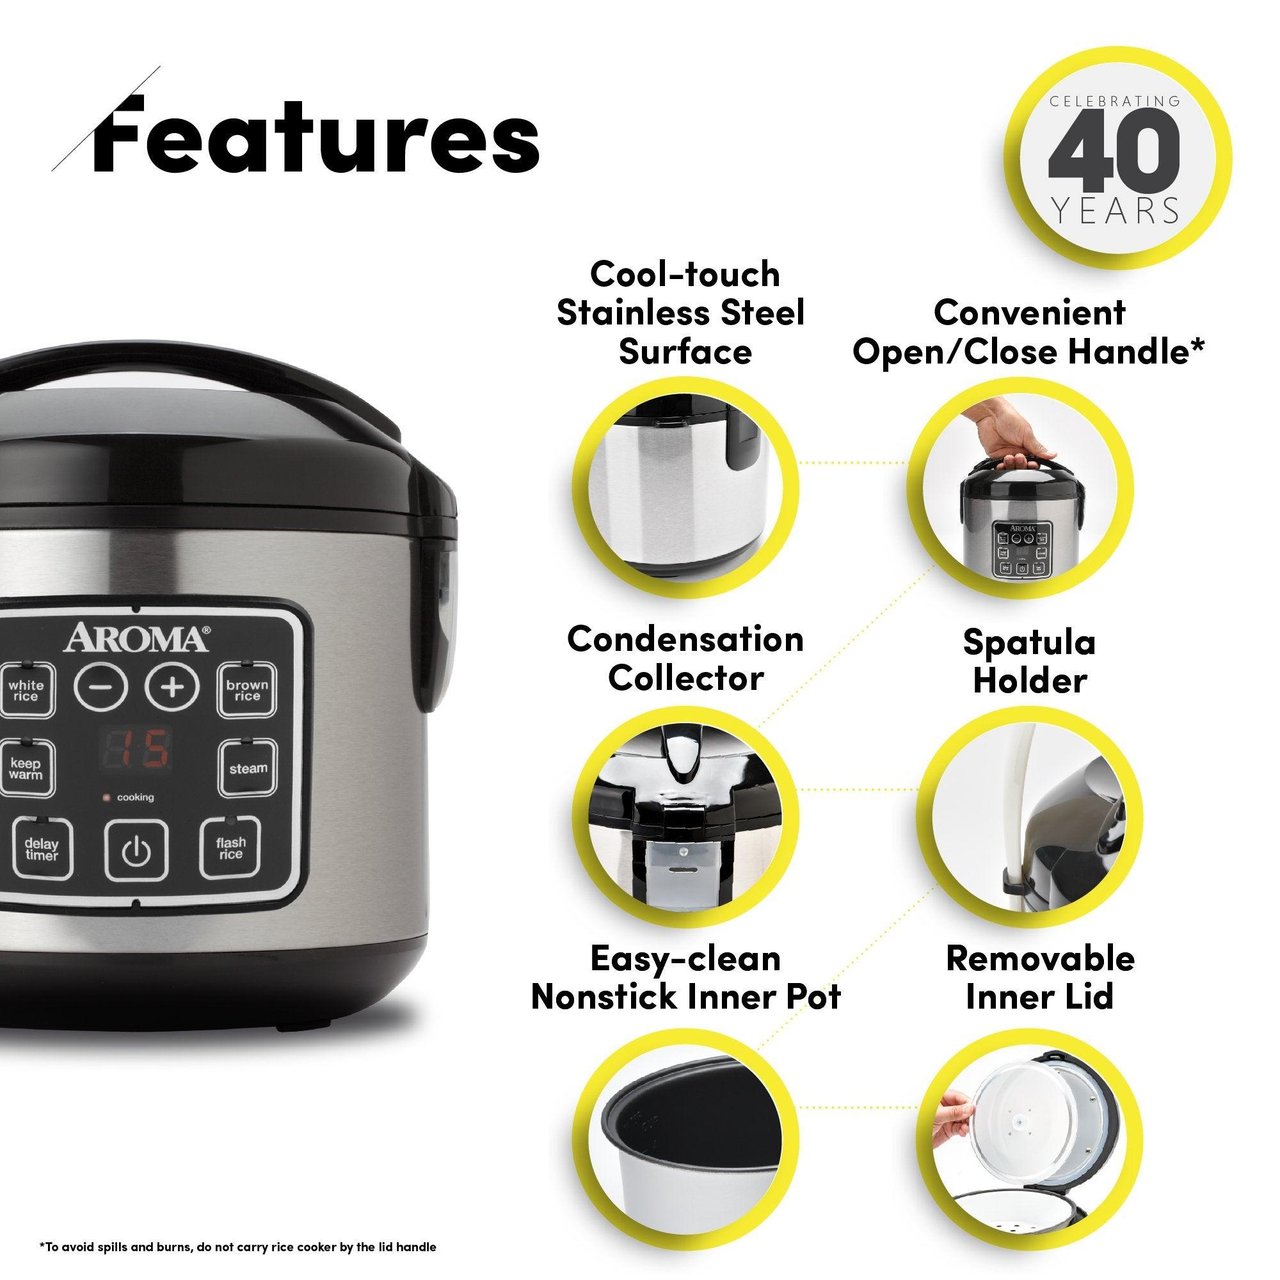 6 AROMA Digital Rice Cooker, 4-Cup (Uncooked) / 8-Cup (Cooked), Steamer, Grain Cooker, Multicooker, 2 Qt, Stainless Steel Exterior, ARC-914SBD